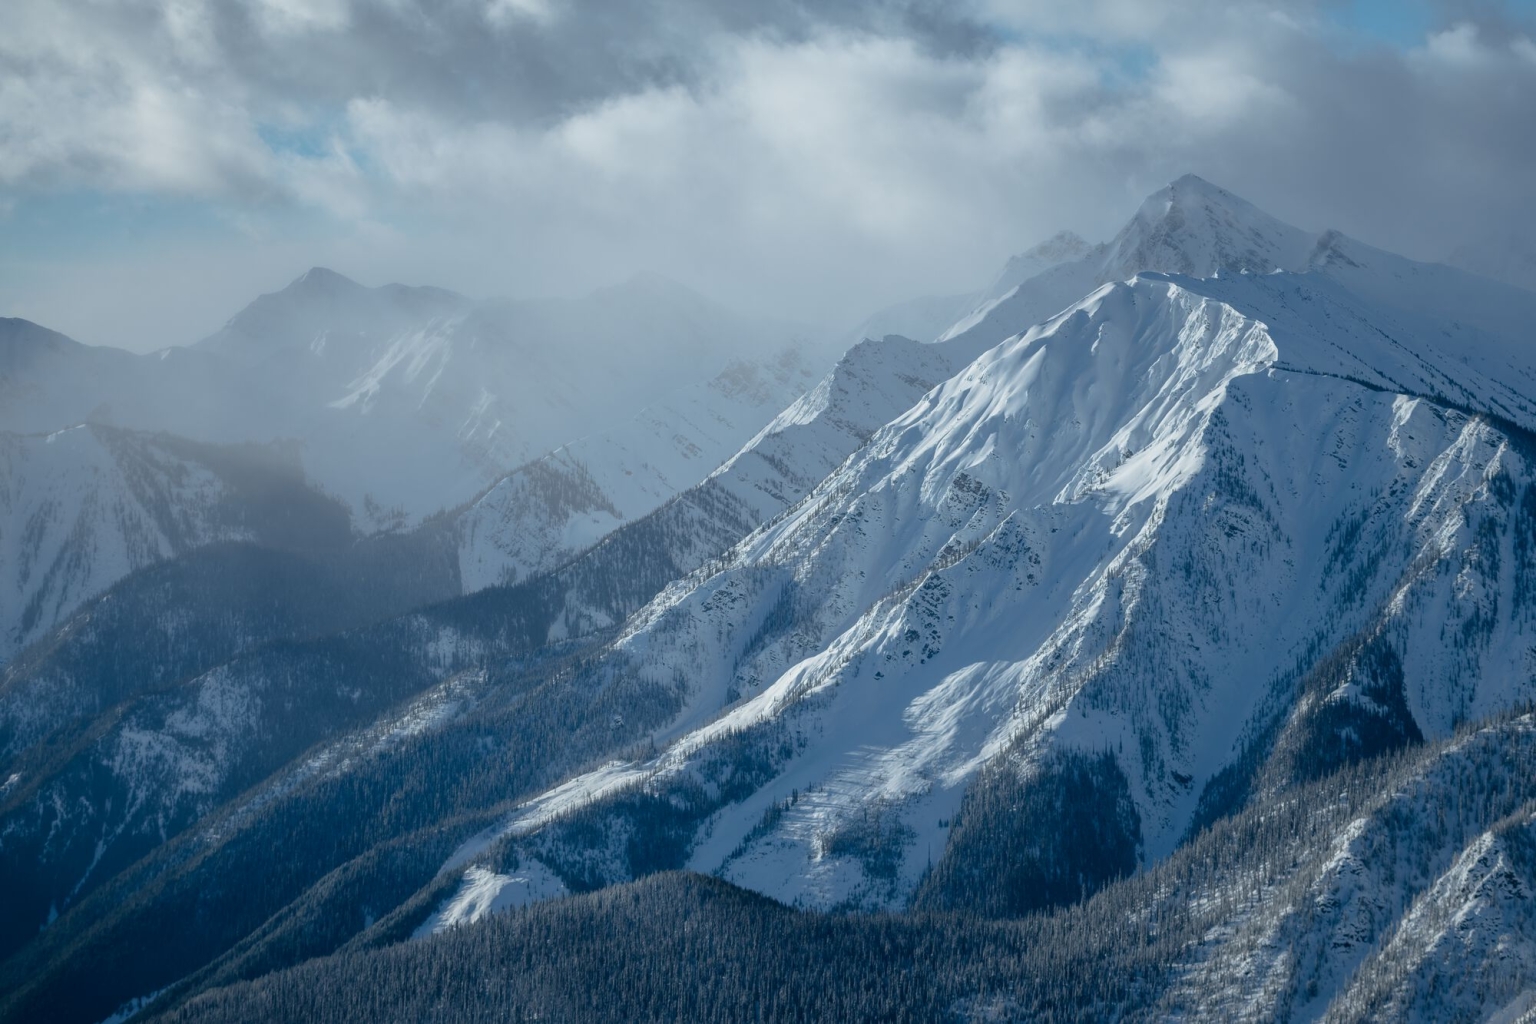 Aerial view of imposing, snow-covered mountains with a foggy sky